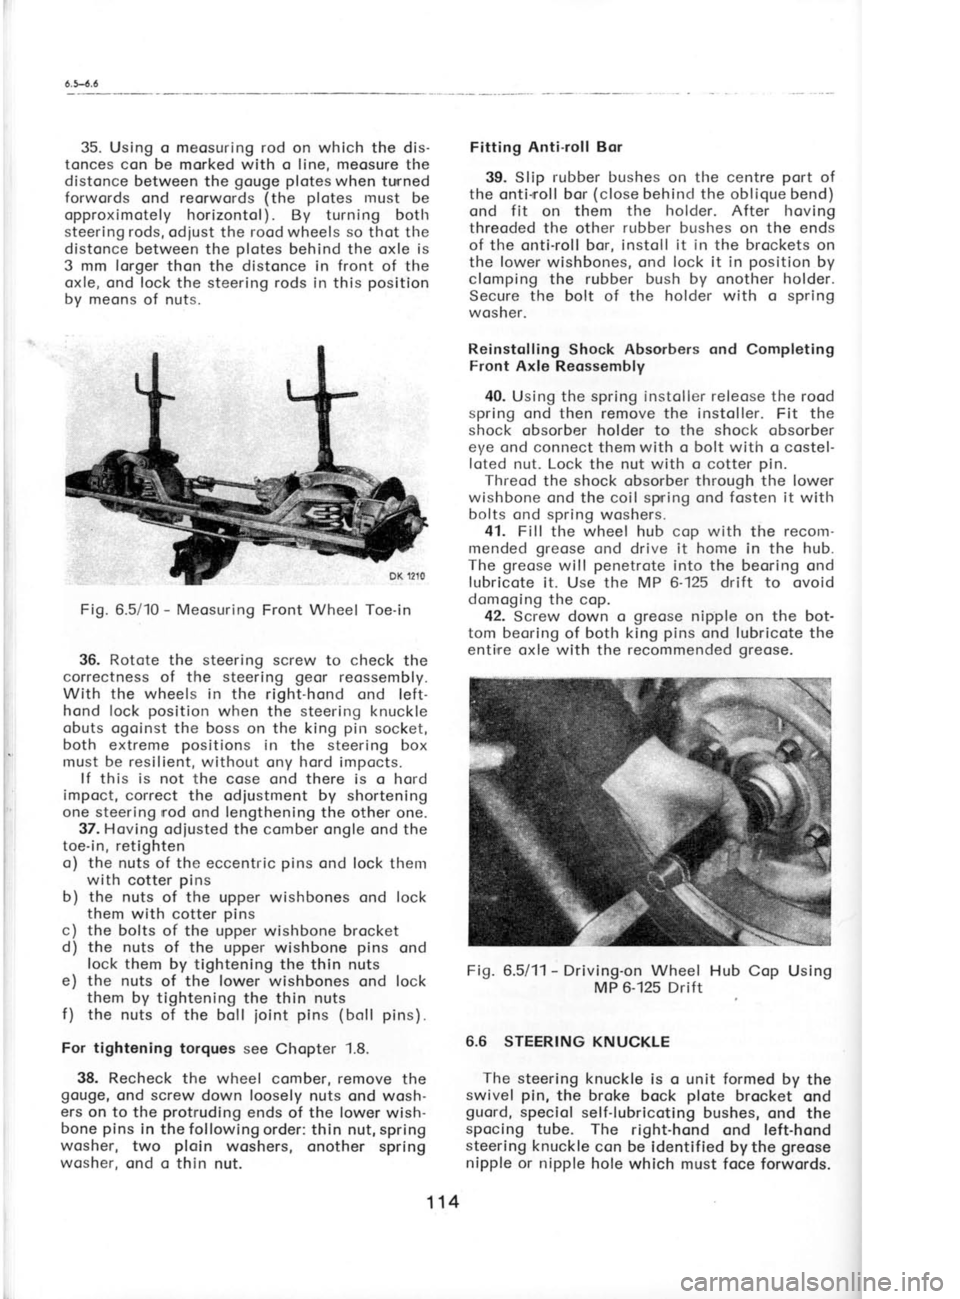 SKODA 105S 1980  Workshop Manual R
tr
el o
tl
Pl
e1
th
35. 
Using 
o meosuring rod 
on which the dis-
tonces con be  morked with  o line, meosure the
distonce between  the gouge plotes 
when tunned
forwords  ond reorwords  (the  plot